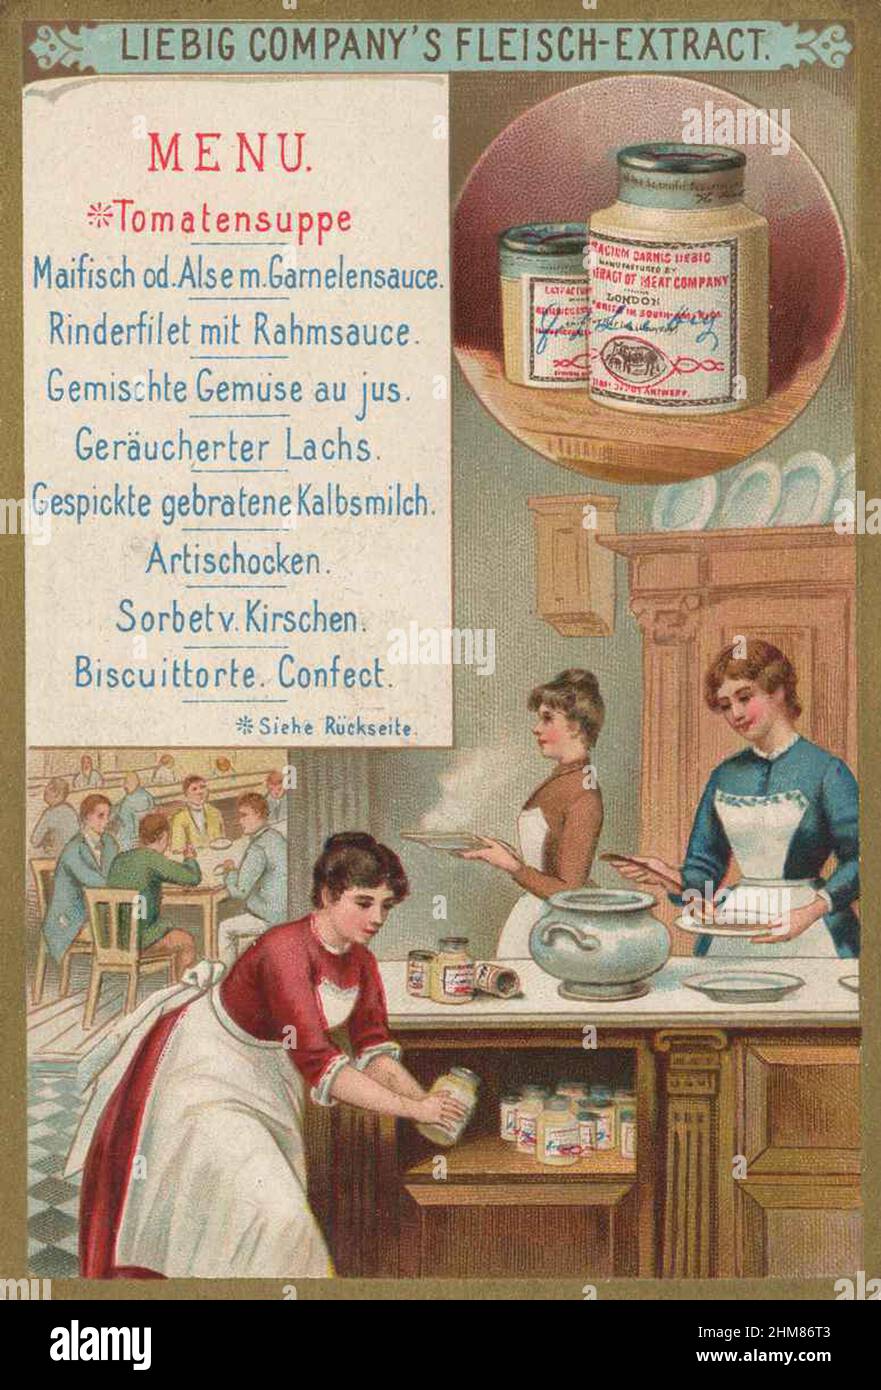 Bilderserie Menü, mit Lachs  /  Image series menu, with salmon, digital improved reproduction of a collectible image from the Liebig company, estimated from 1900, pd  /  digital restaurierte Reproduktion eines Sammelbildes von ca 1900, gemeinfrei Stock Photo